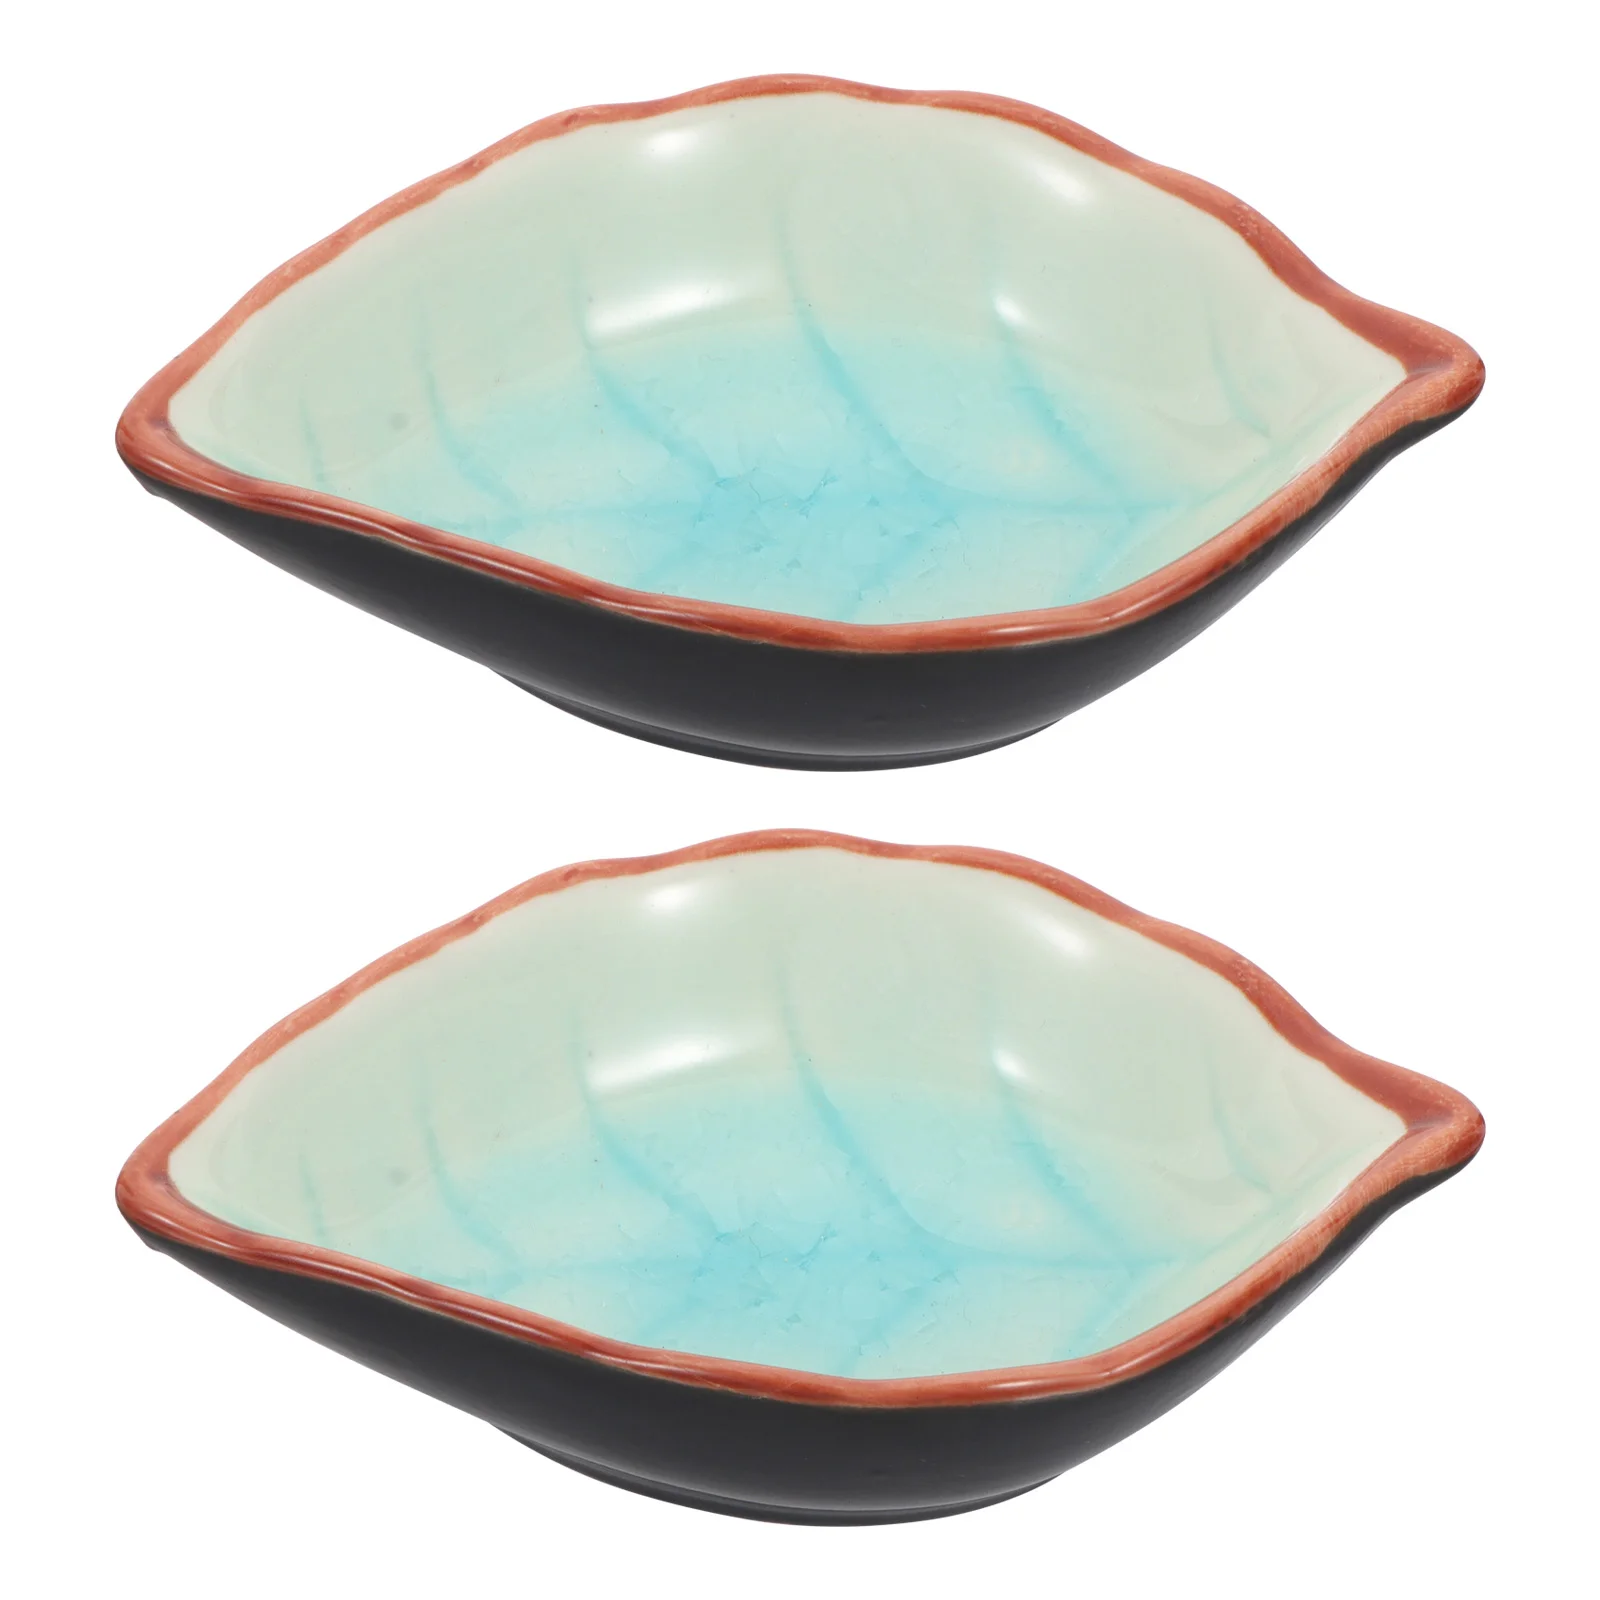 

2 Pcs Ink Dish Pallet Pigment Storage Plate Painting Holder Brush Ceramics Dipping Bowls Office Inkwell Sauce